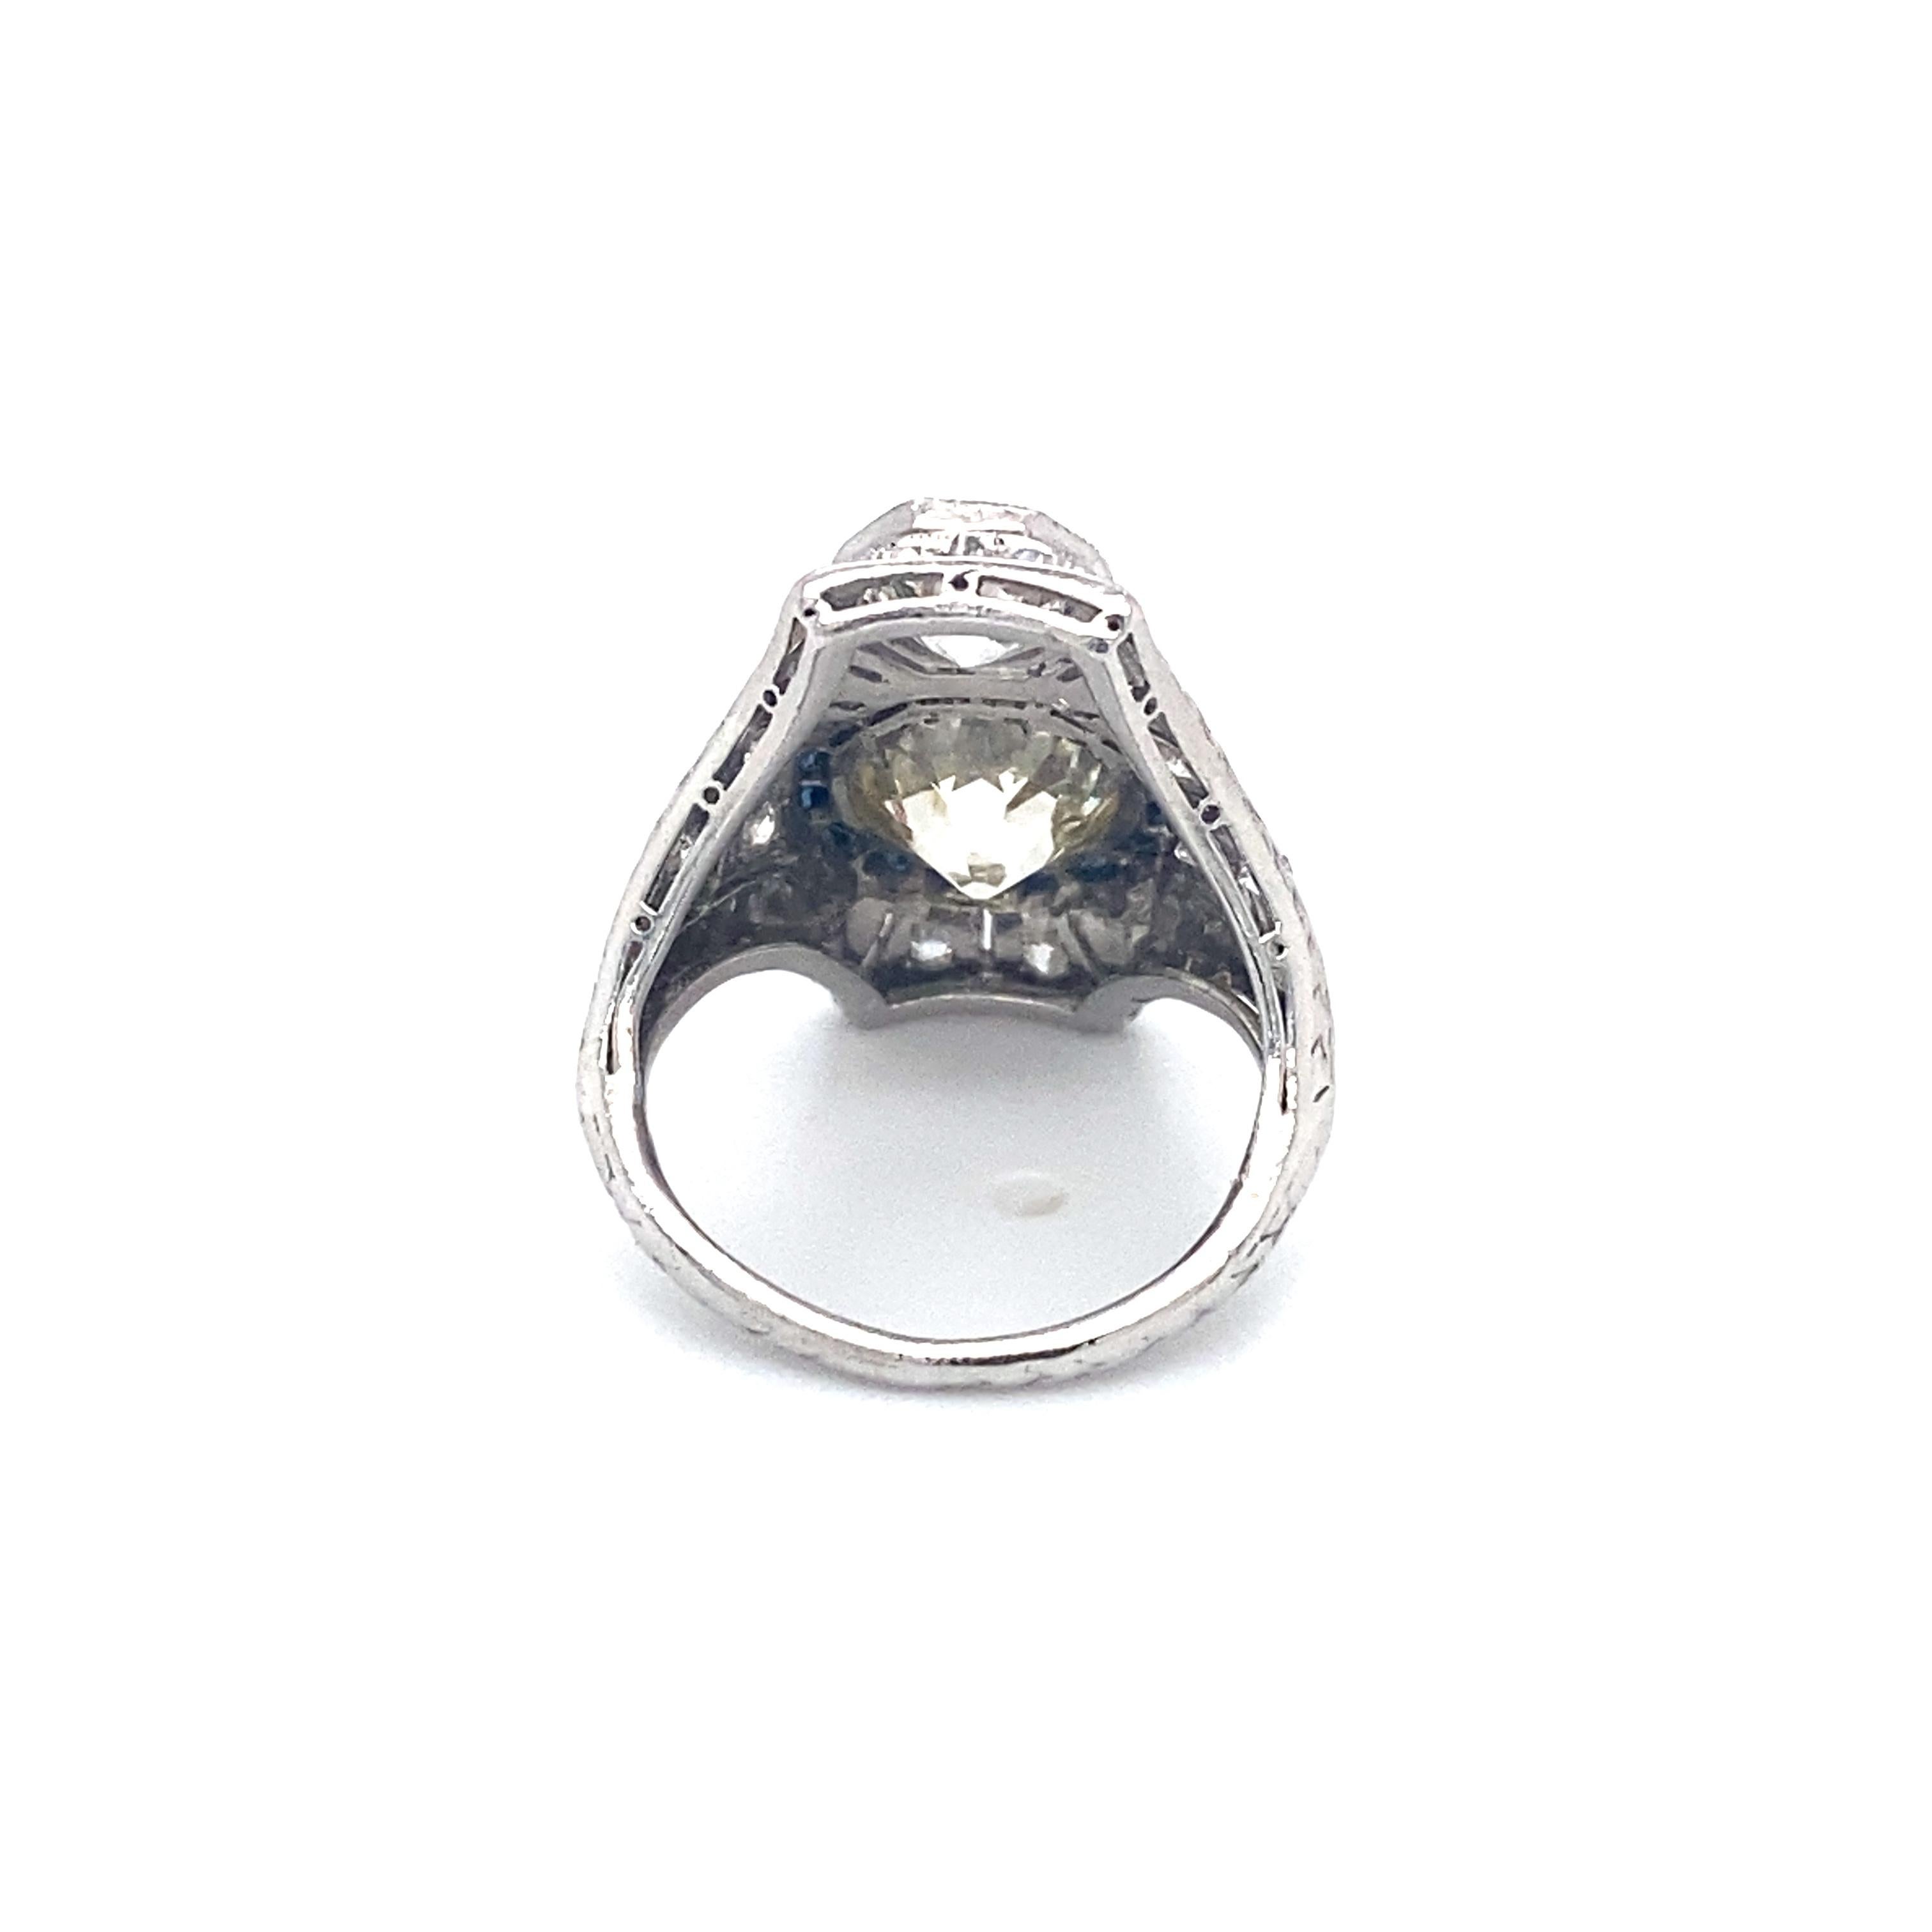 Women's or Men's 1920s Art Deco 3.70 Carat Total Diamond and Sapphire Cocktail Ring in Platinum For Sale